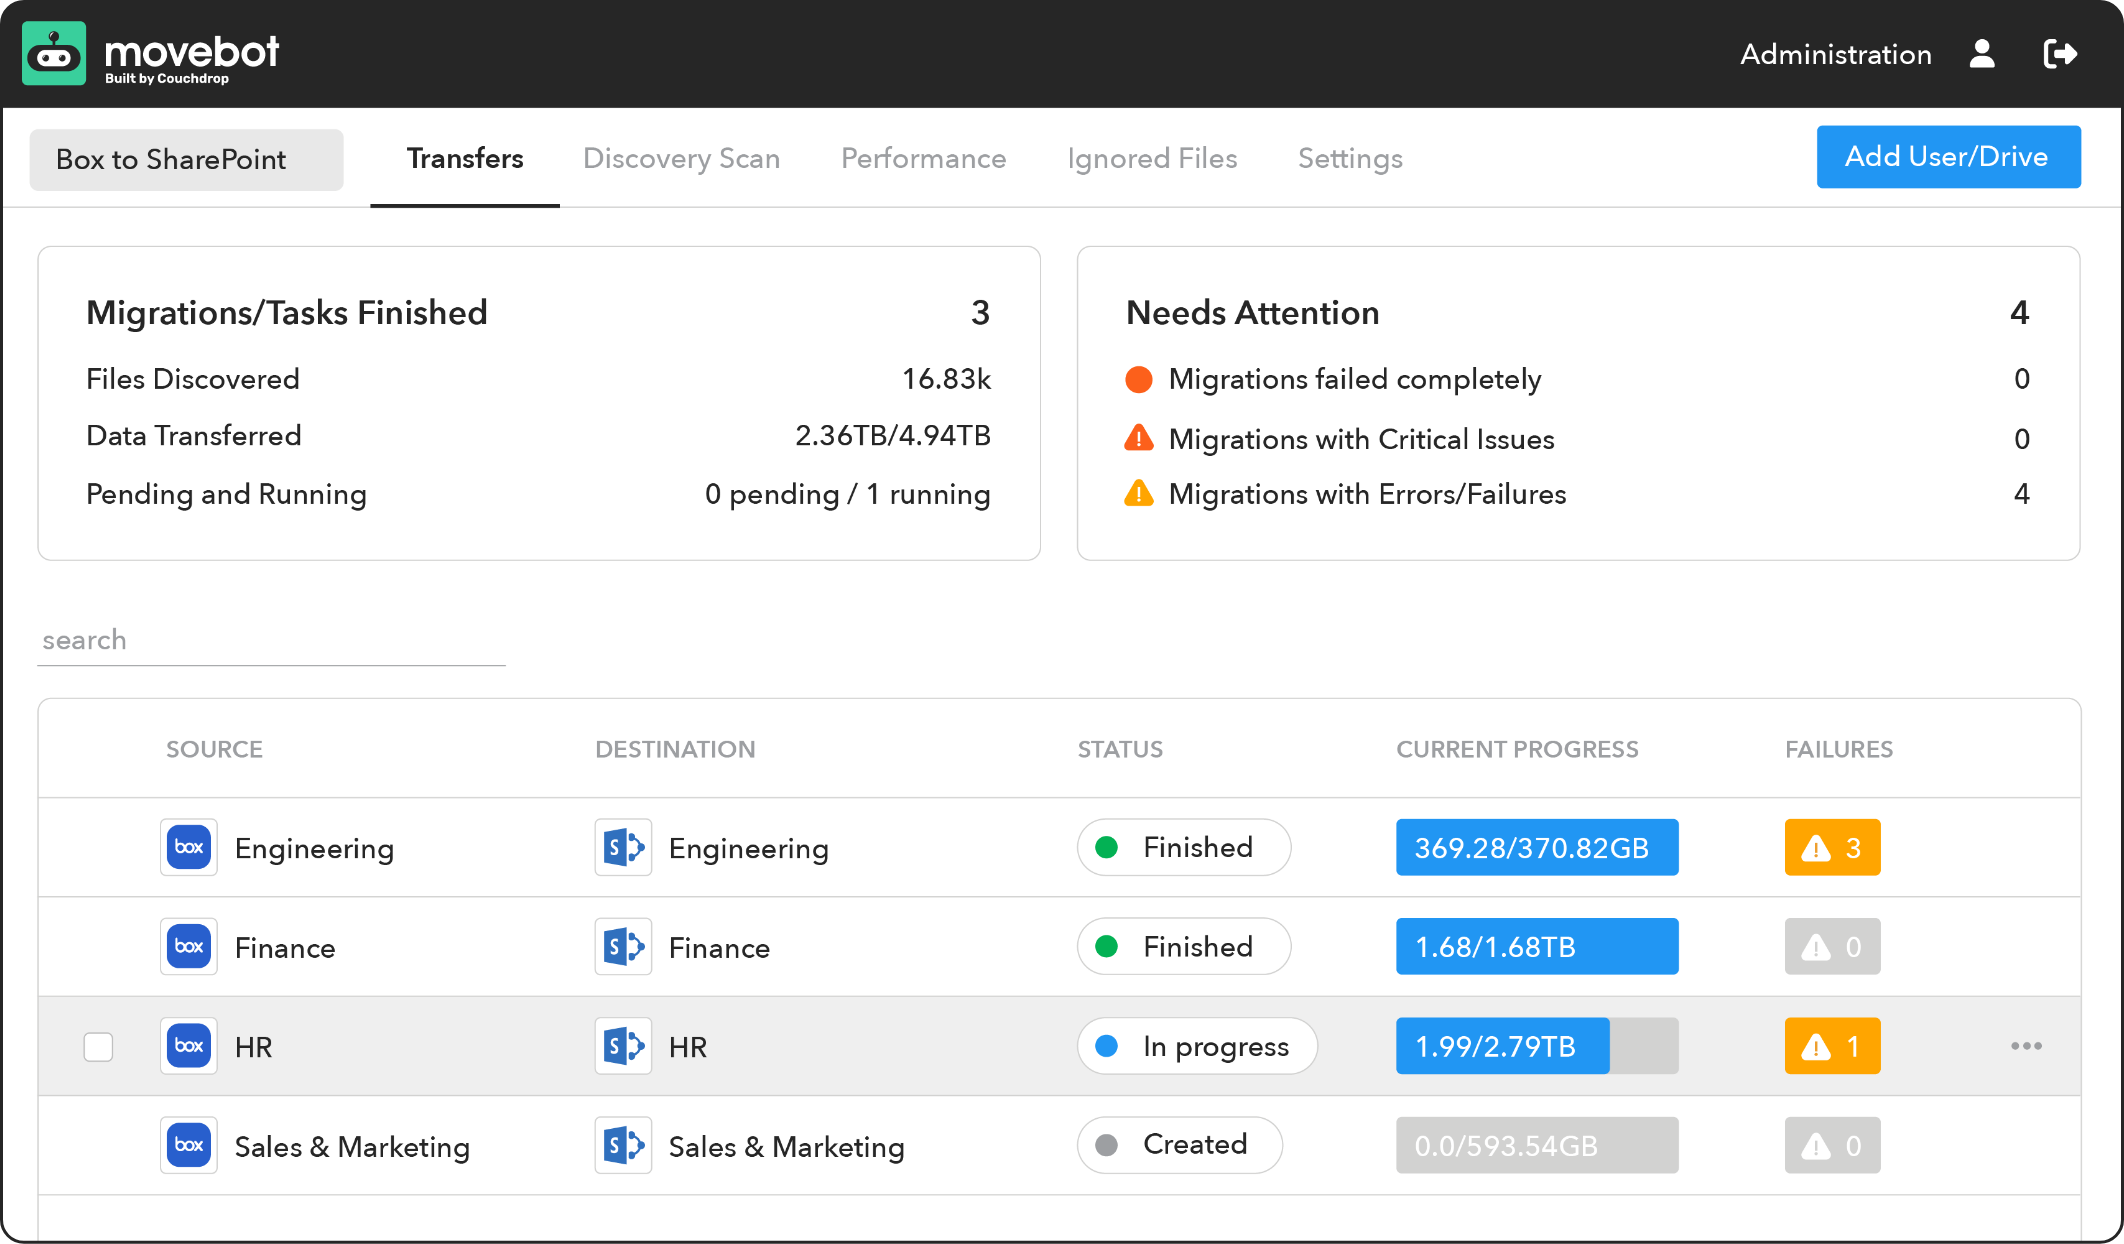 Movebot dashboard showing Box to SharePoint migration